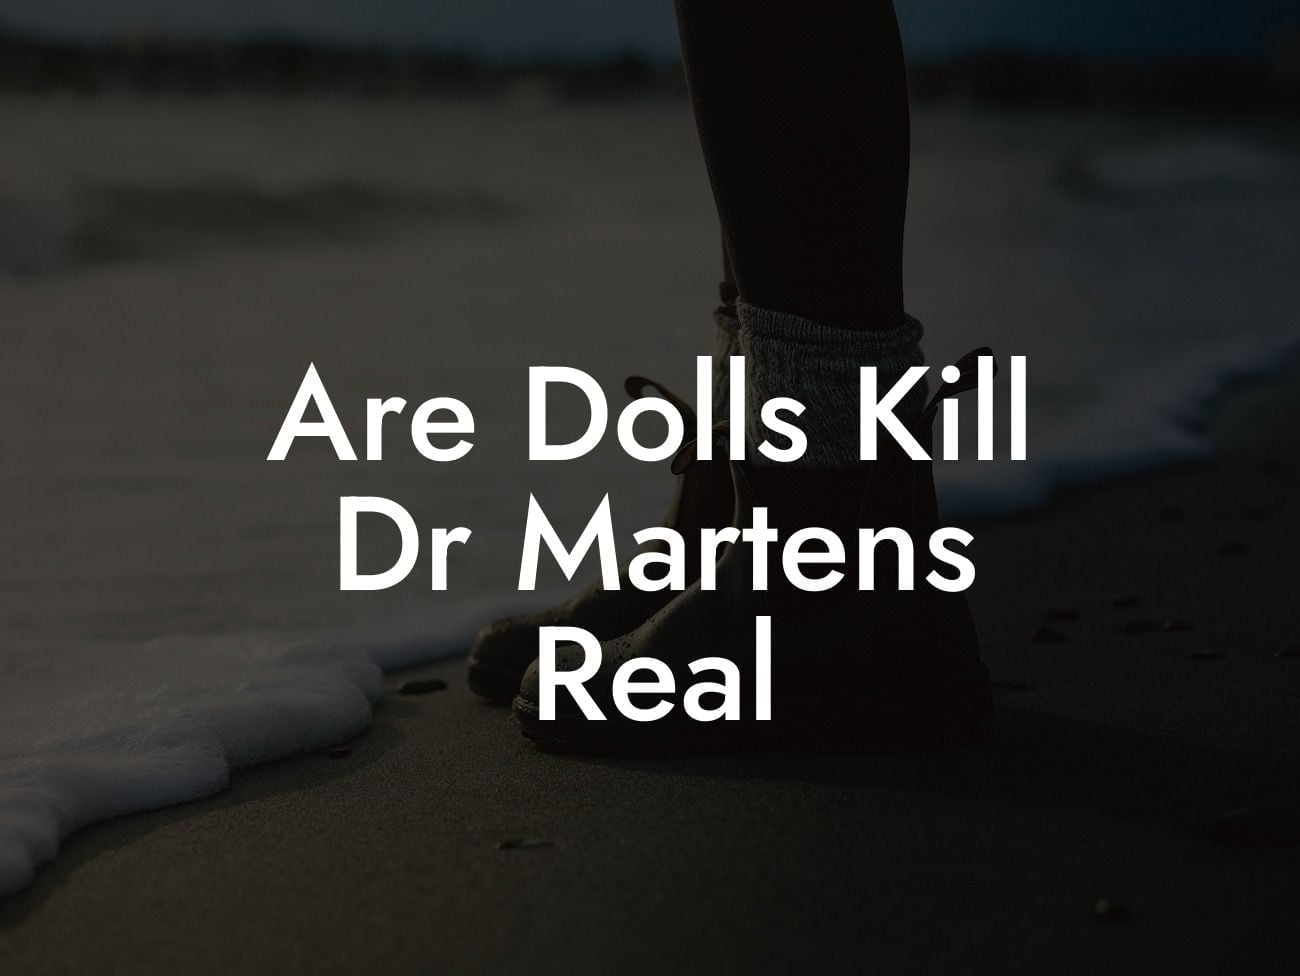 Are Dolls Kill Dr Martens Real